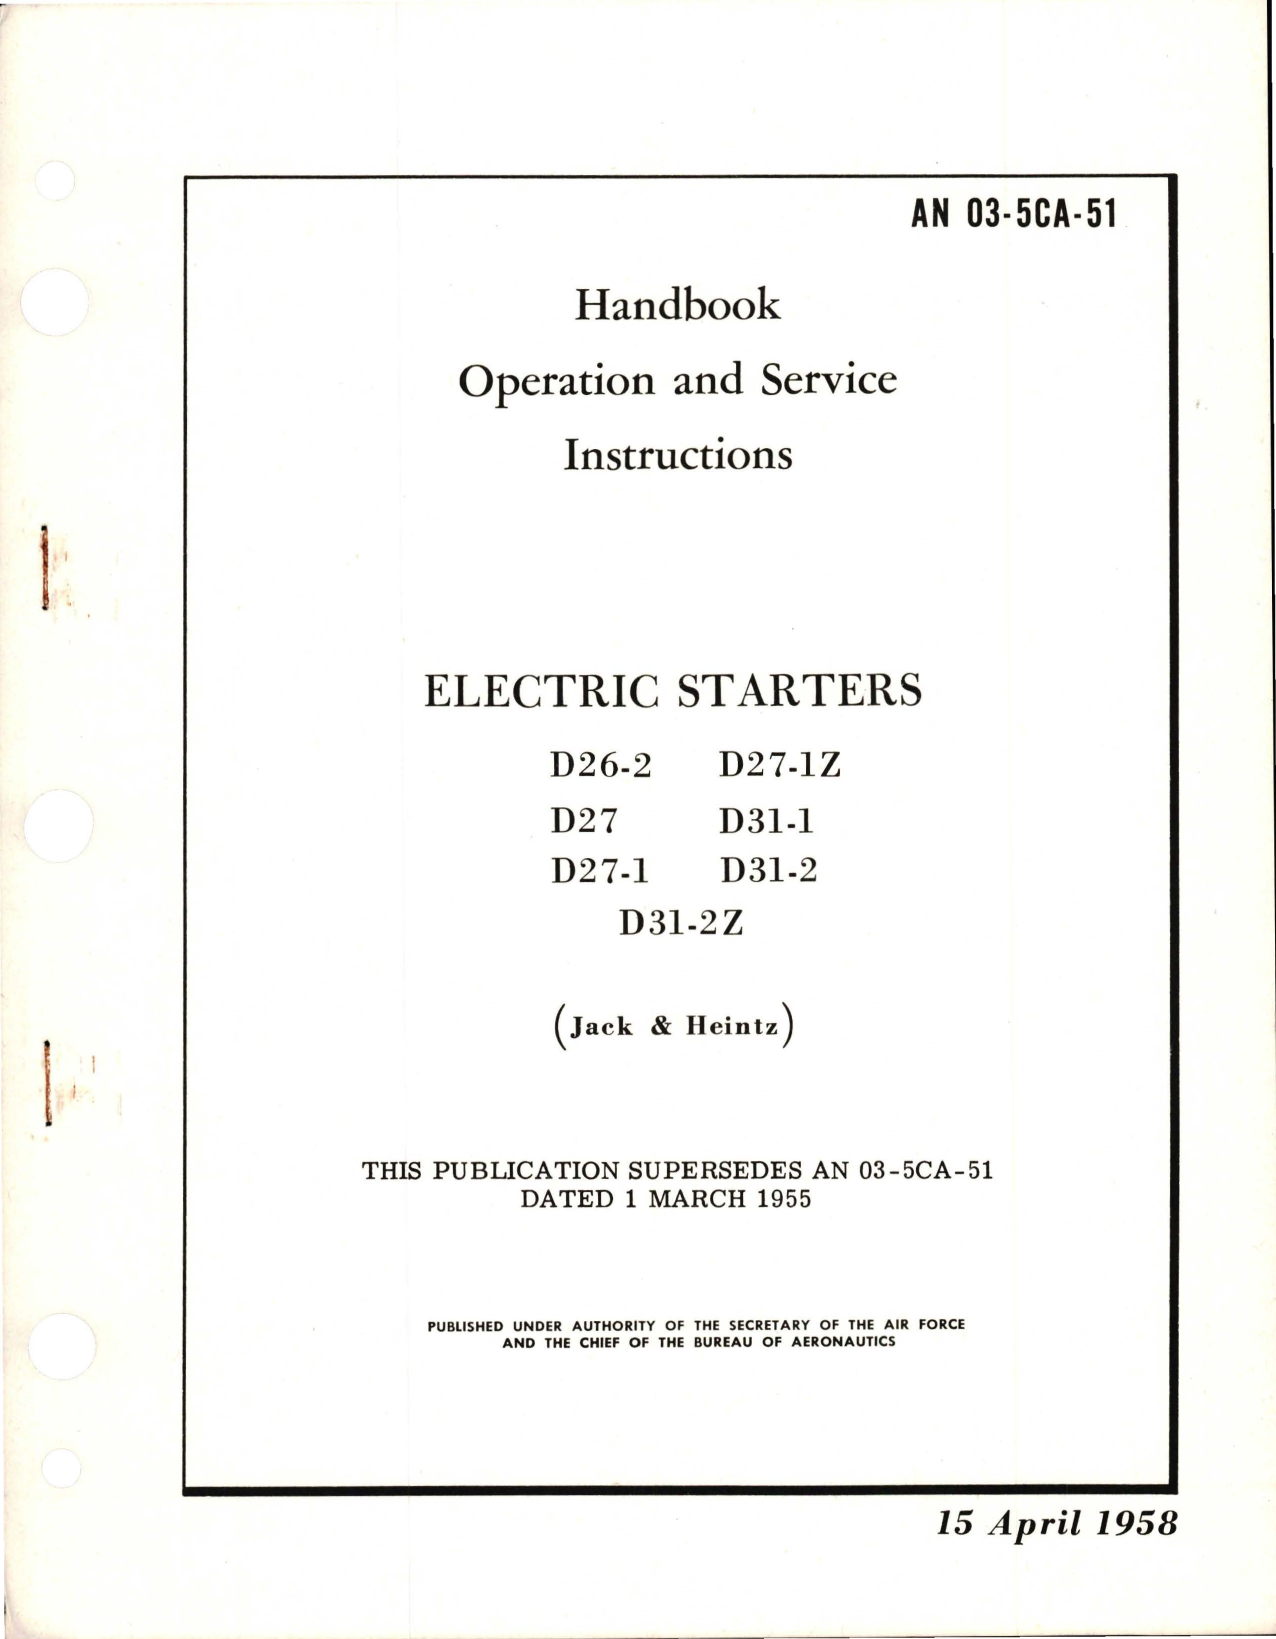 Sample page 1 from AirCorps Library document: Operation and Service Instructions for Electric Starters